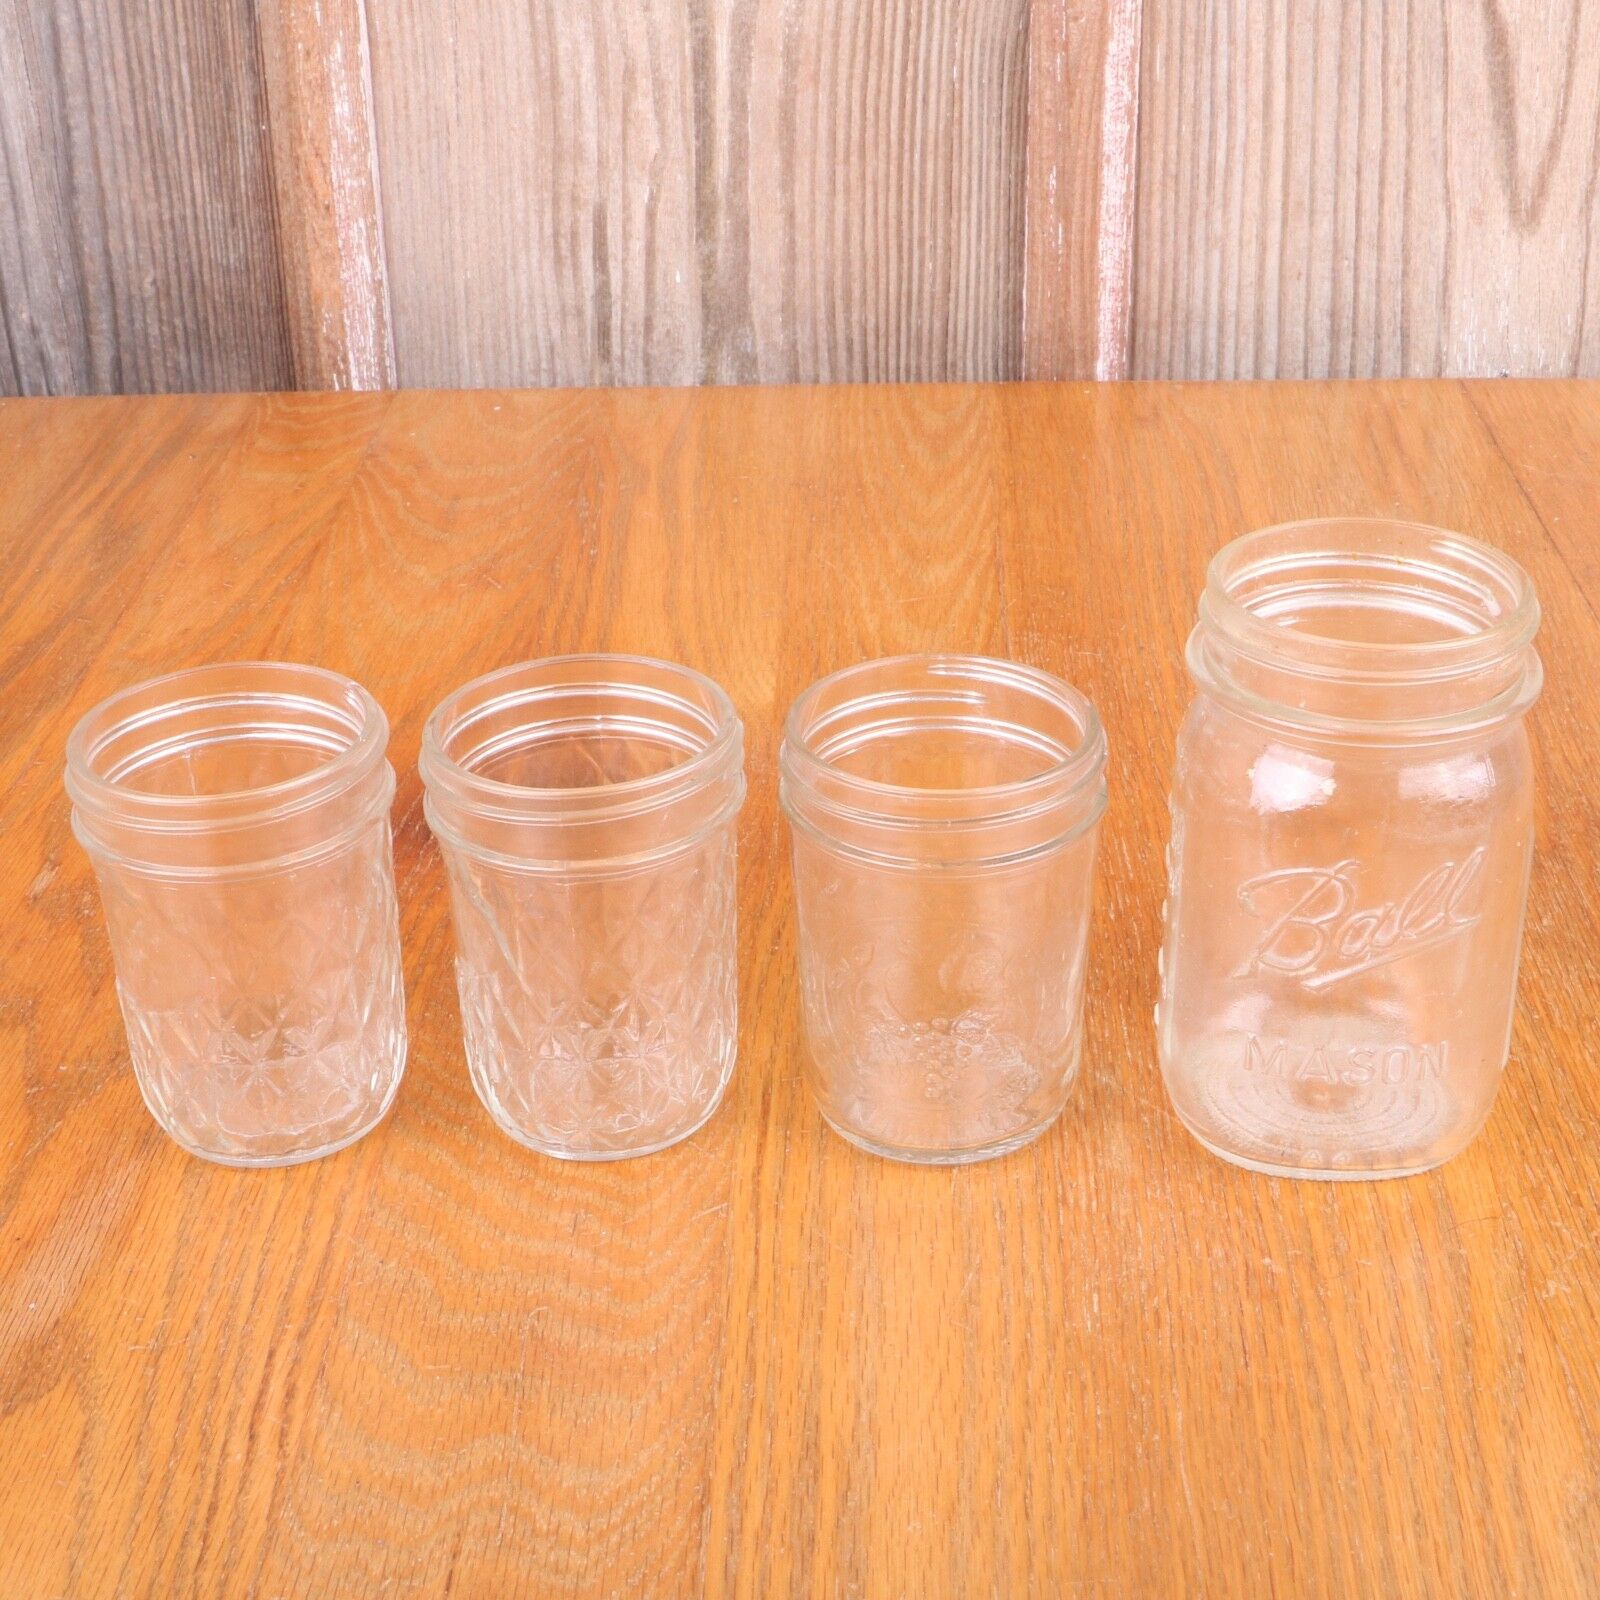 4 Ball Mason Jars A4 A12 2 Quilted Crystal